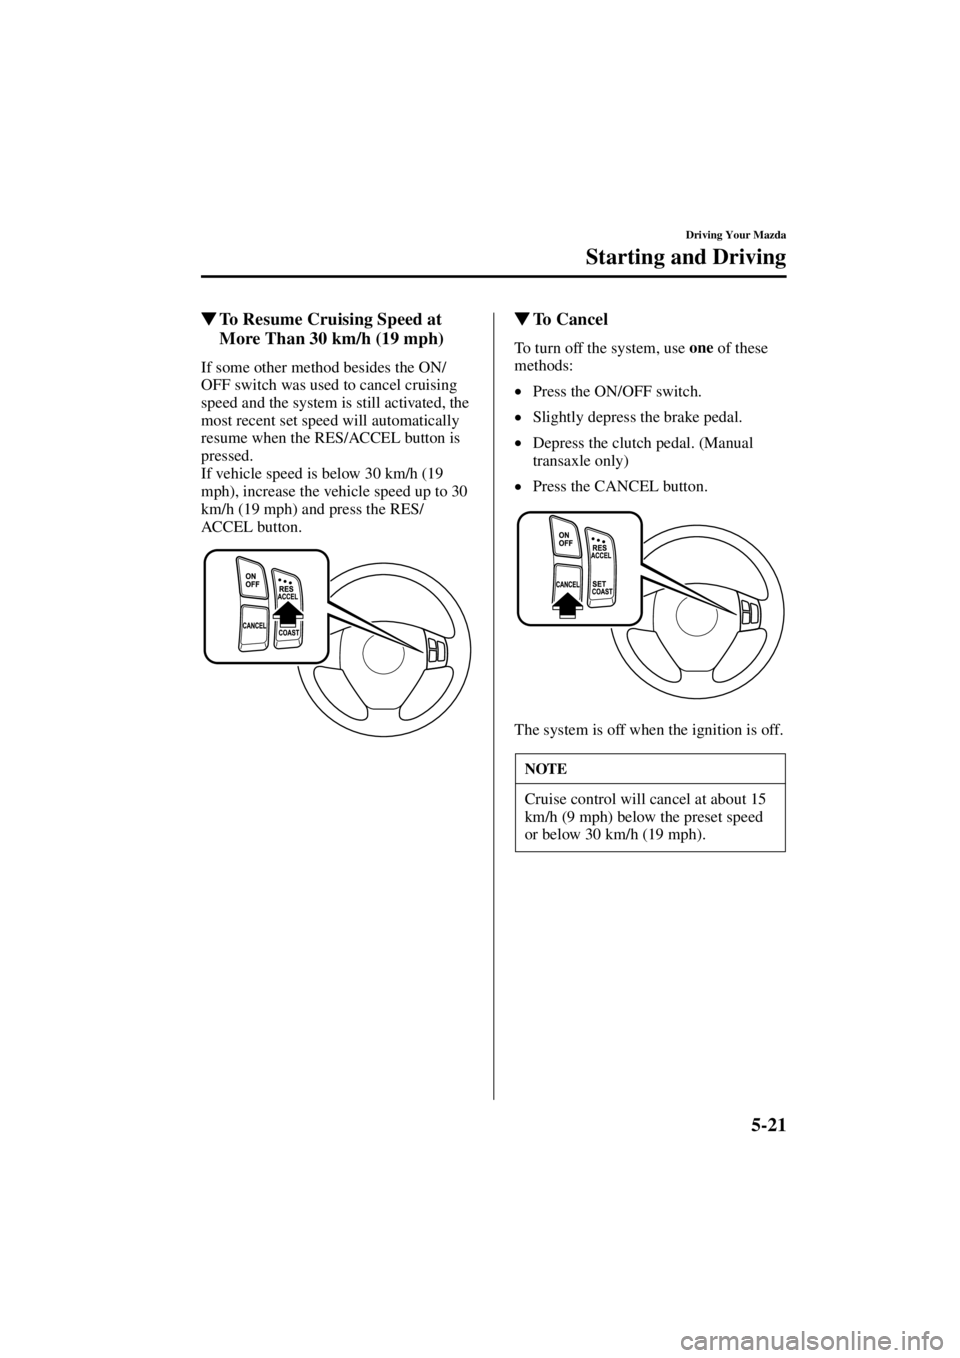 MAZDA MODEL 3 4-DOOR 2004  Owners Manual 5-21
Driving Your Mazda
Starting and Driving
Form No. 8S18-EA-03I
To Resume Cruising Speed at 
More Than 30 km/h (19 mph)
If some other method besides the ON/
OFF switch was used to cancel cruising 
